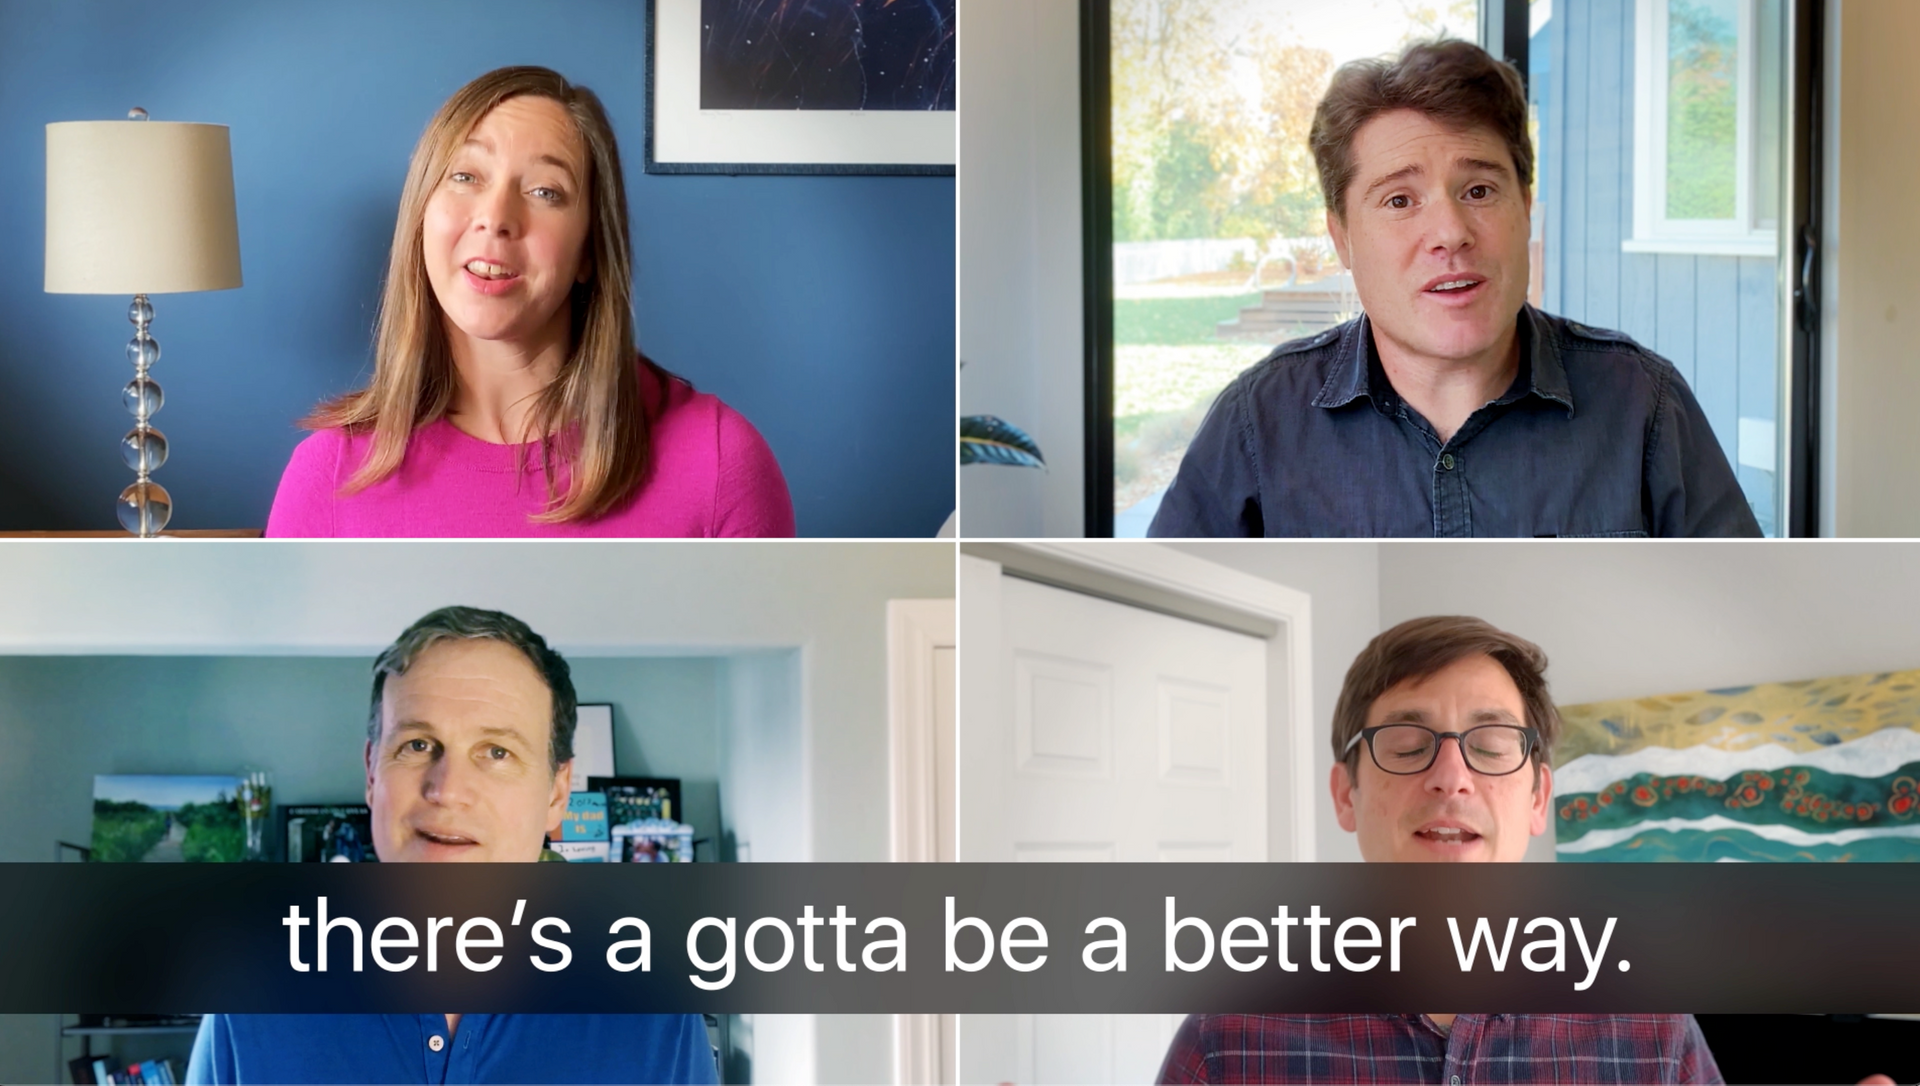 Producing Video Testimonials Used to Be a Huge Pain. Here's How We're Fixing It.